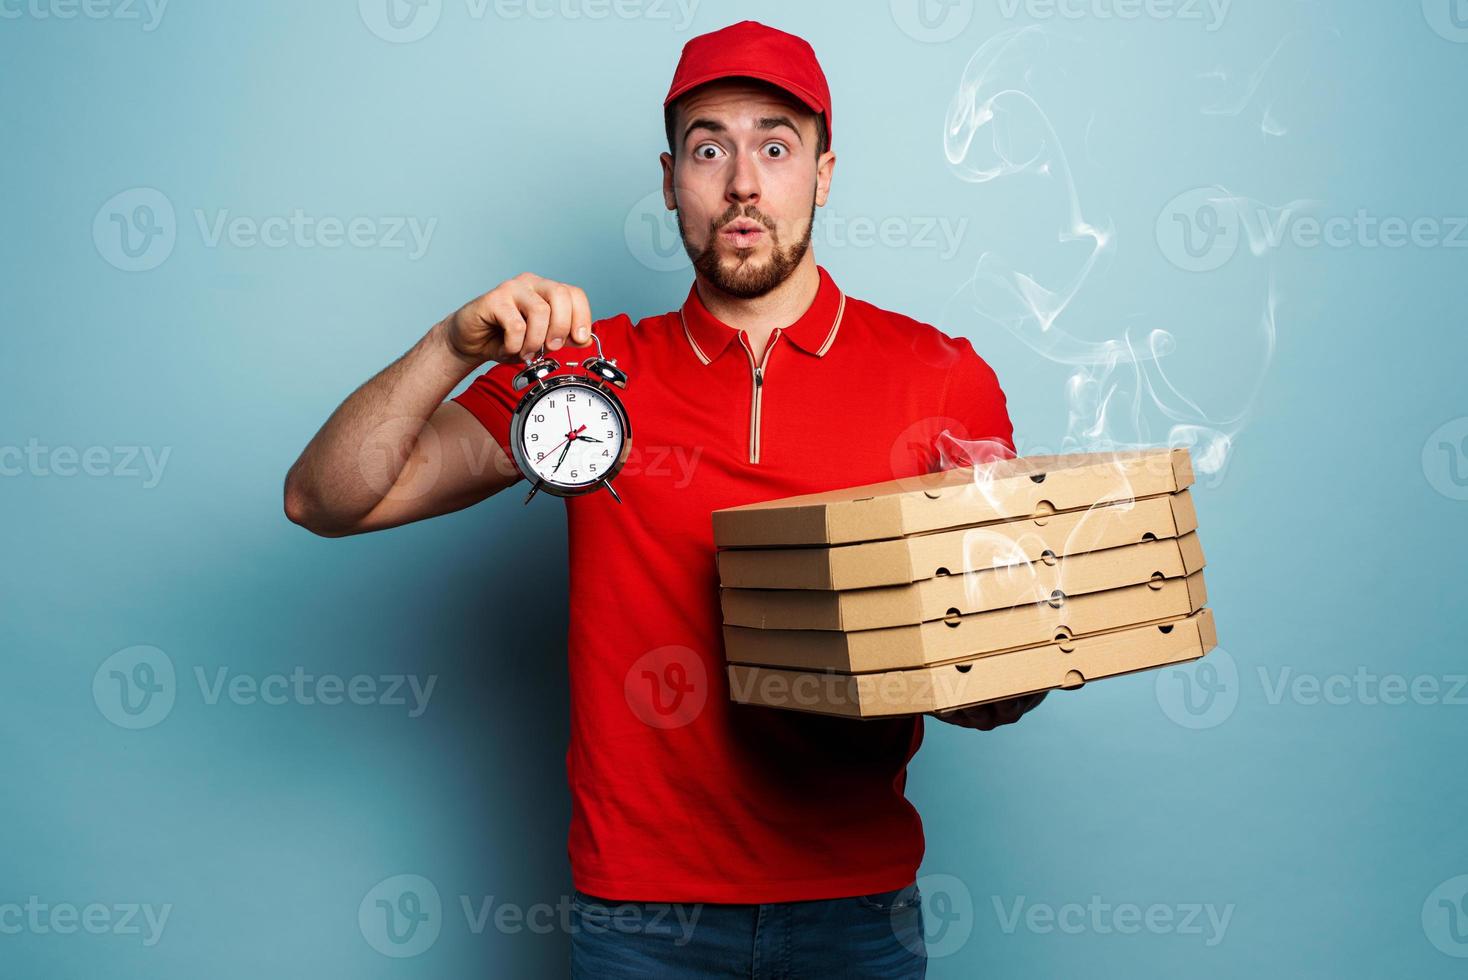 Courier is punctual to deliver quickly pizzas. Cyan background photo